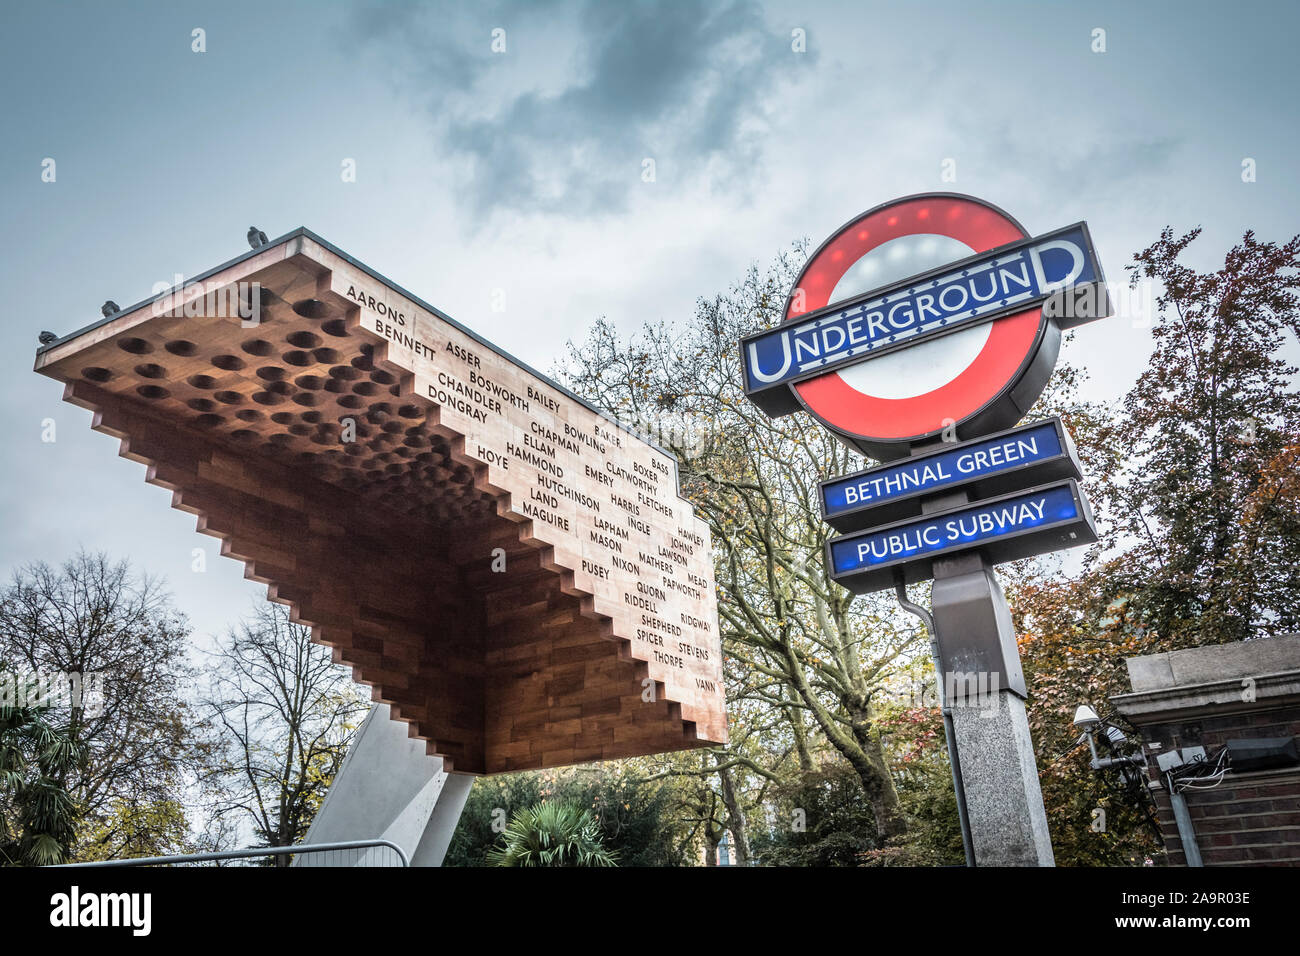 Bethnal Green Public Subway Memorial by Arboreal Architecture, Bethnal Green Underground Station, London, England, UK Stock Photo